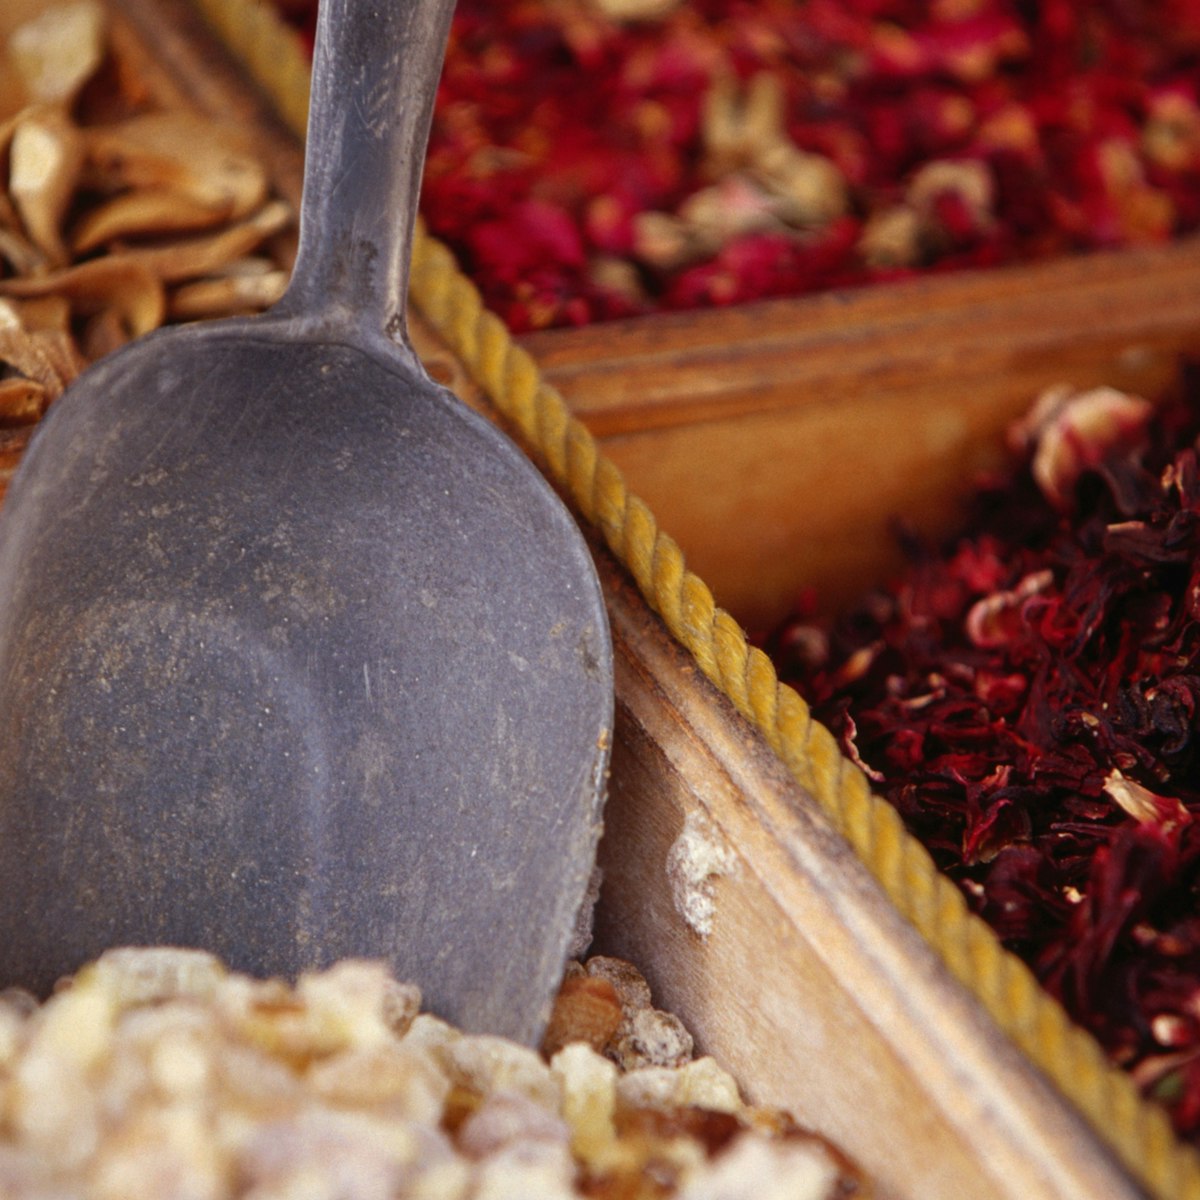 Herbs and spices at suq.